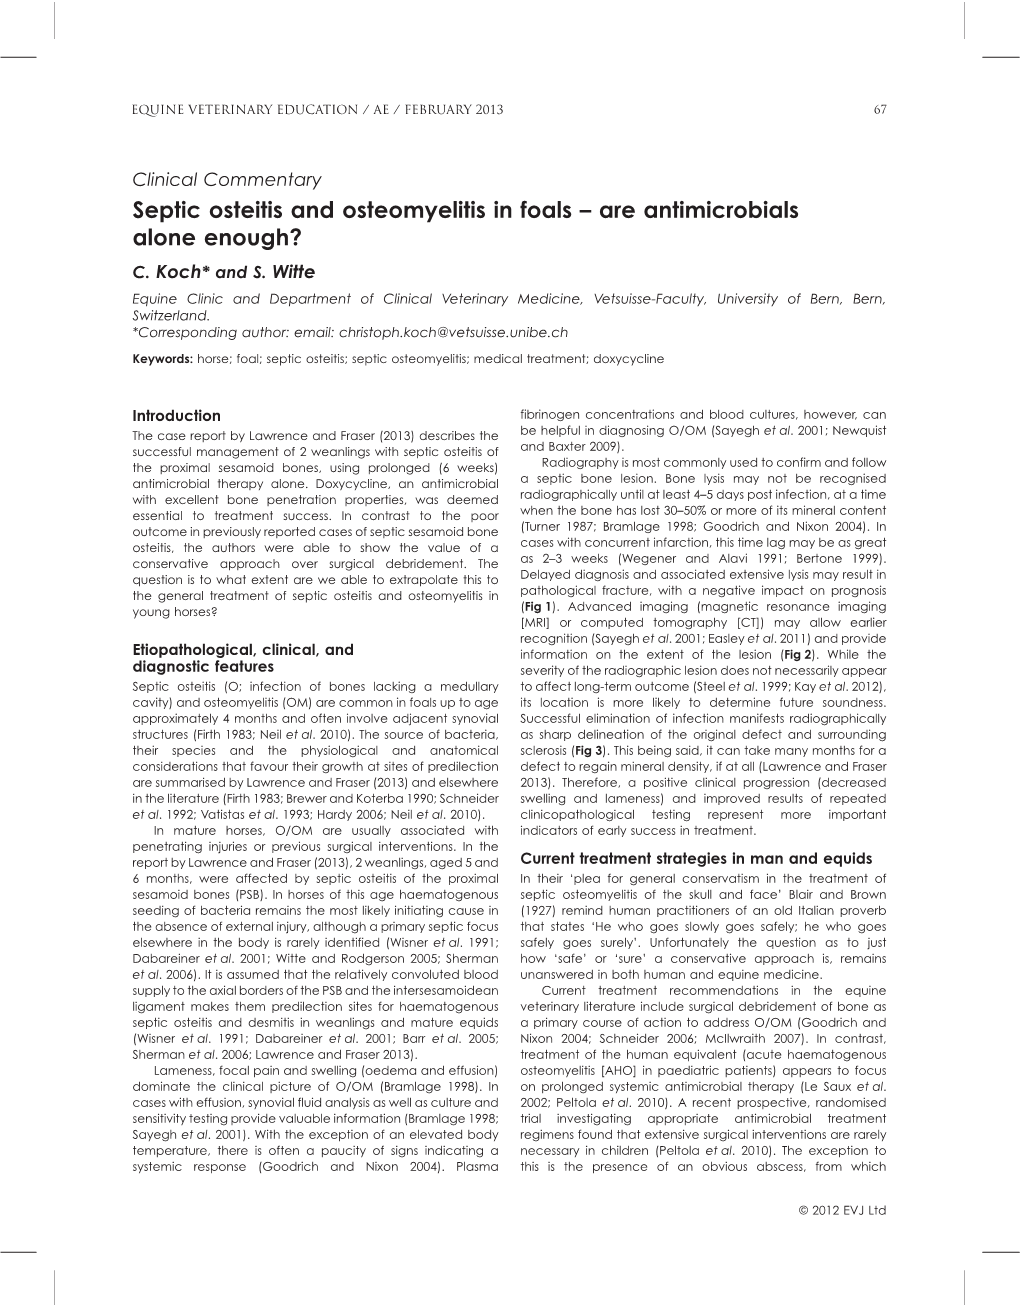 Septic Osteitis and Osteomyelitis in Foals – Are Antimicrobials Alone Enough? C